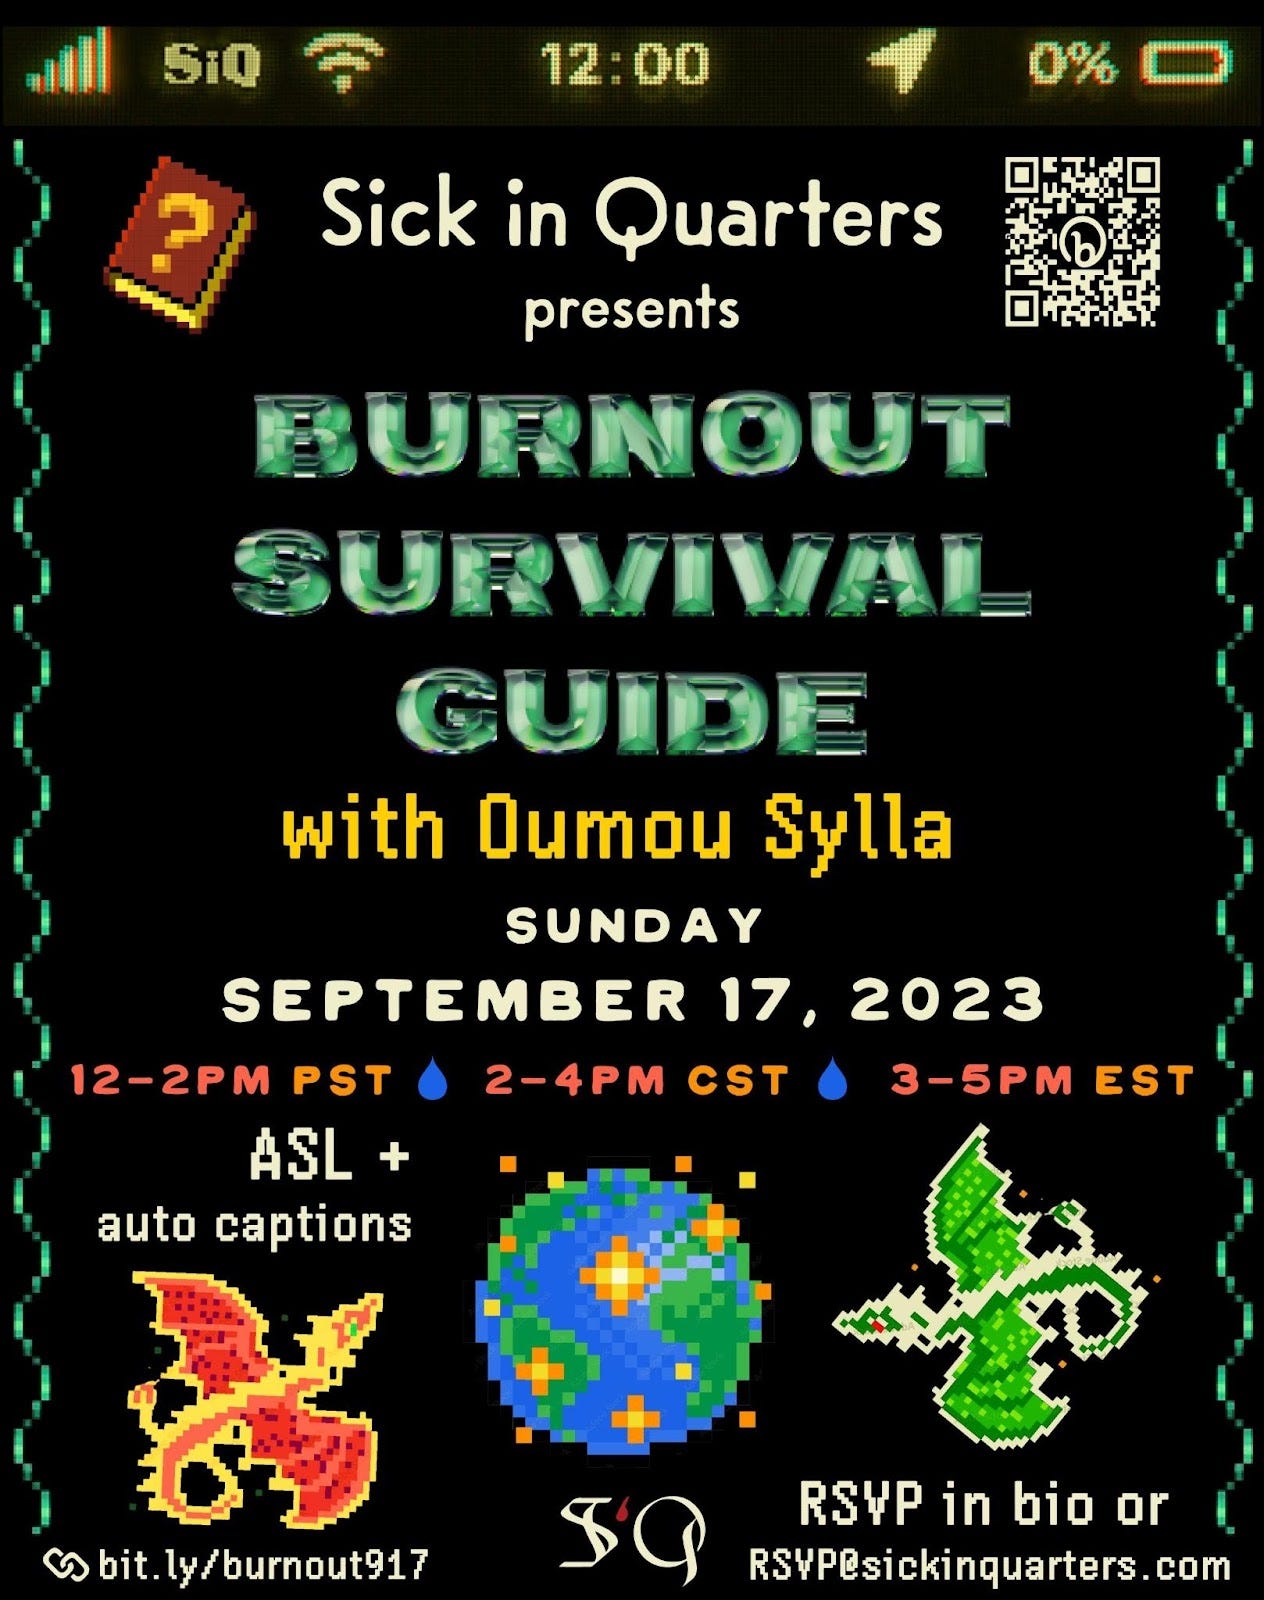 a graphic event poster with a black background resembling the dark mode of a phone screen, containing video game style font and pixel art. Across the top edge appears to be classic phone details in light yellow with 5 bars of phone service,  the WiFi connectivity symbol with the word ‘SiQ’ next to it as the network, the time 12:00 in centered, a location arrow, and 0% battery. In the upper left corner of the mock phone screen is a brown pixel art video game quest book with a marigold yellow question mark on its cover. In the top right is a light cream Bitly QR code leading to the event RSVP form. Centered on the screen is light cream text that reads ‘Sick in Quarters presents,’ with bold emerald cut-jewel style all caps font reading ‘BURNOUT SURVIVAL GUIDE’ underneath, and marigold yellow pixel font reading ‘with Oumou Sylla’ beneath that. The event date is in light cream all caps simple font, ‘SUNDAY, SEPTEMBER 17, 2023’. The times are listed in orange tones with each time zone separated by a blue raindrop shape : 12-2pm PST [raindrop] 2-4PM CST [raindrop] 3-5pm EST. In light beige pixel font underneath reads ‘ASL + auto captions’. Directly beneath is a pixel art orange, yellow and red dragon with a curled spiked tail. In the bottom right corner is a link icon followed by light beige text : bit.ly/burnout917. In the bottom center is the SiQ logo with the S and Q in gothic bone-tone font, and the lowercase blood drop shaped letter i is in dark red. There is a pixel art Earth above the logo, scattered with small sparkle flames, with a green pixel art dragon on the right. In the bottom right corner underneath the green dragon is light beige pixel font that reads : ‘RSVP in bio or RSVP@sickinquarters.com’. The vertical borders of the screen are flourished with emerald green wiggling pixel lines in a single-strand DNA shape.